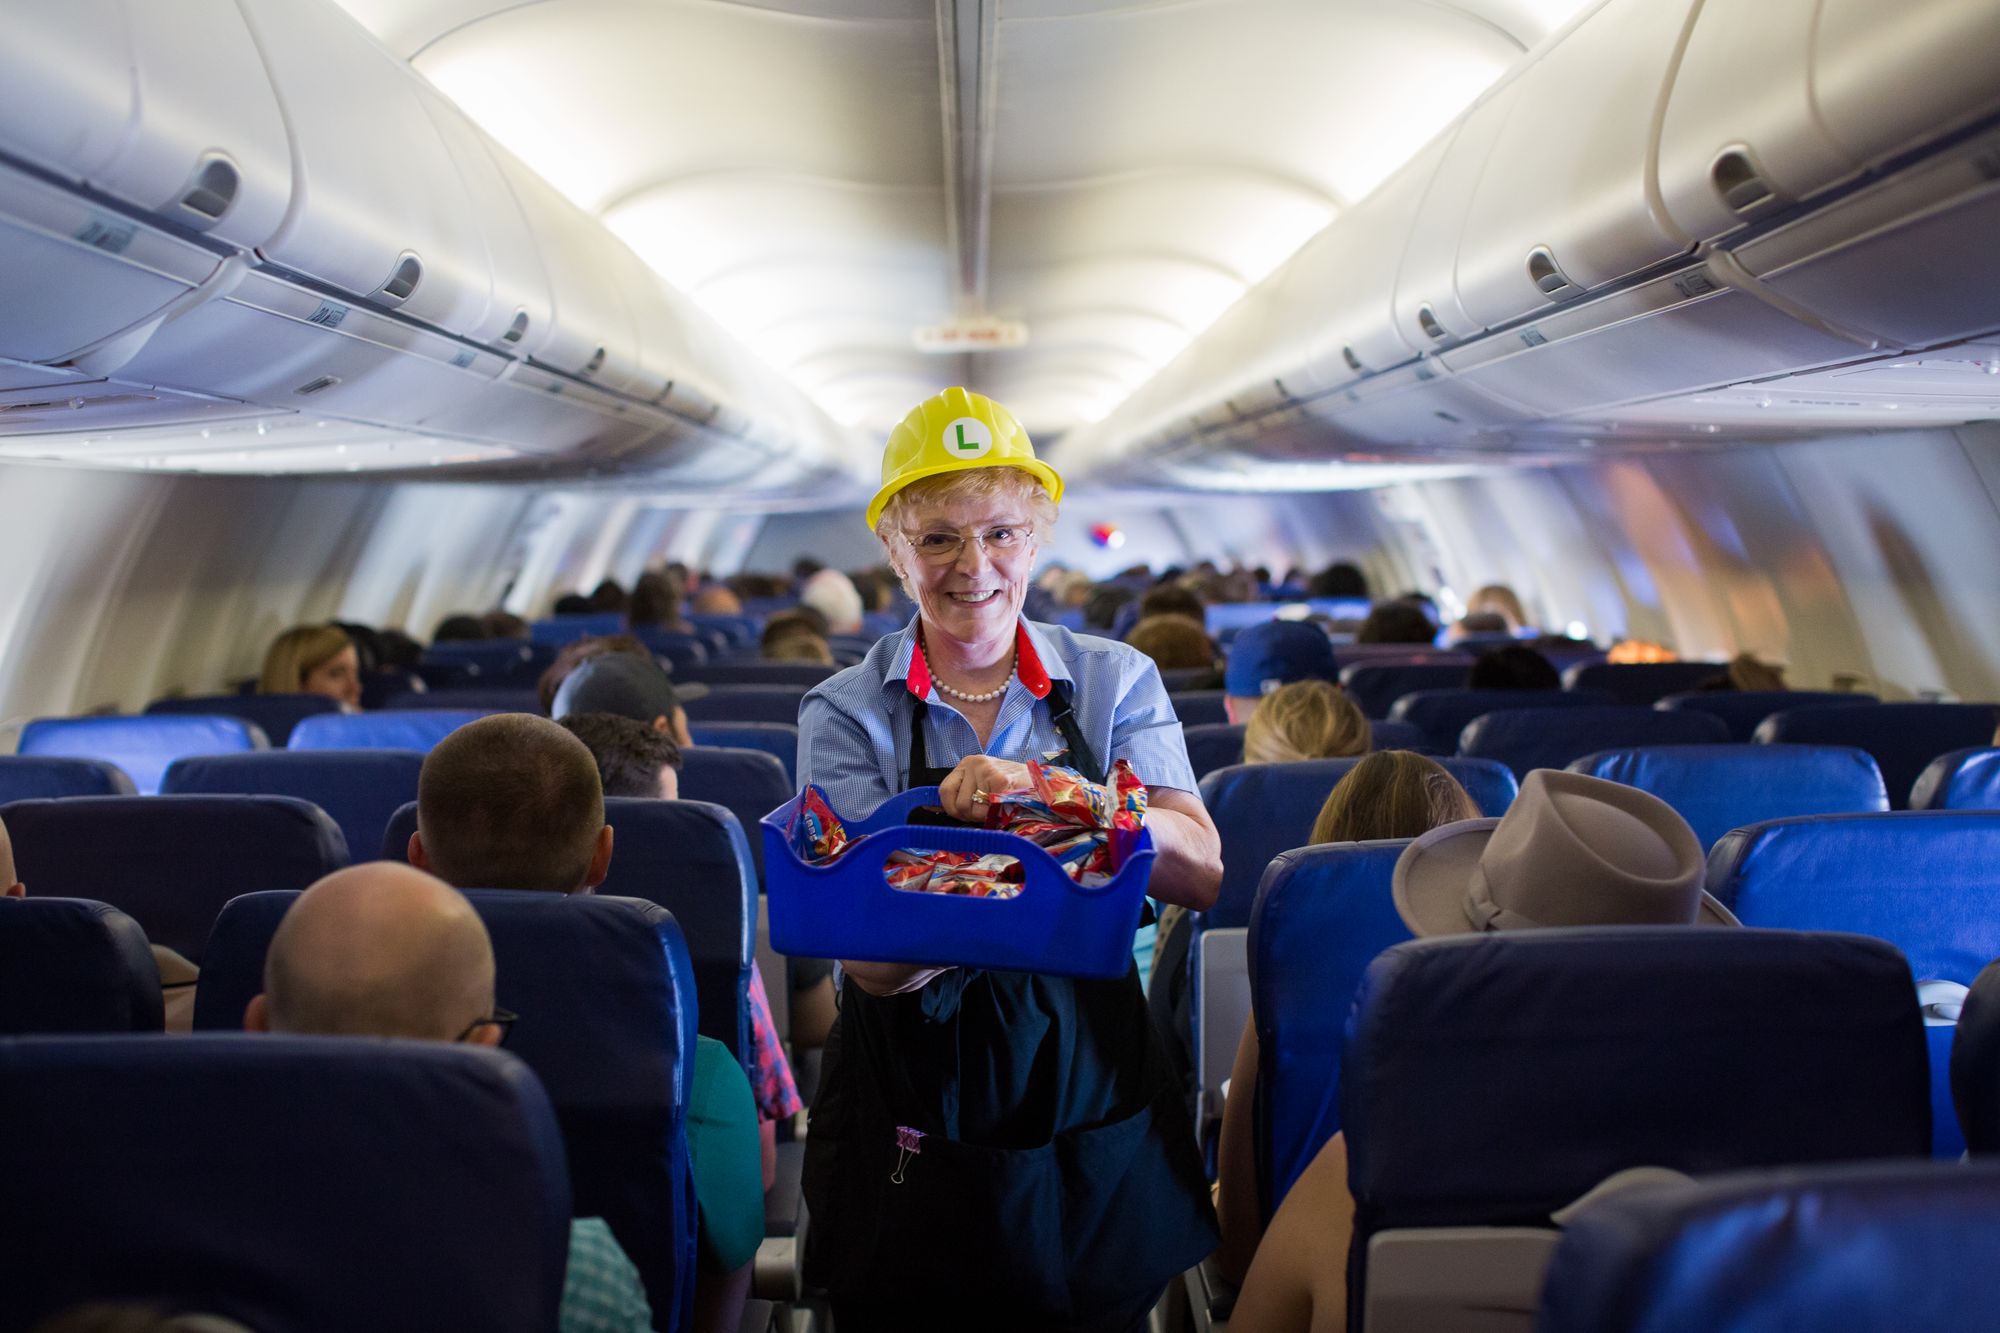 Southwest Airlines: Freedom to Delight the Customer